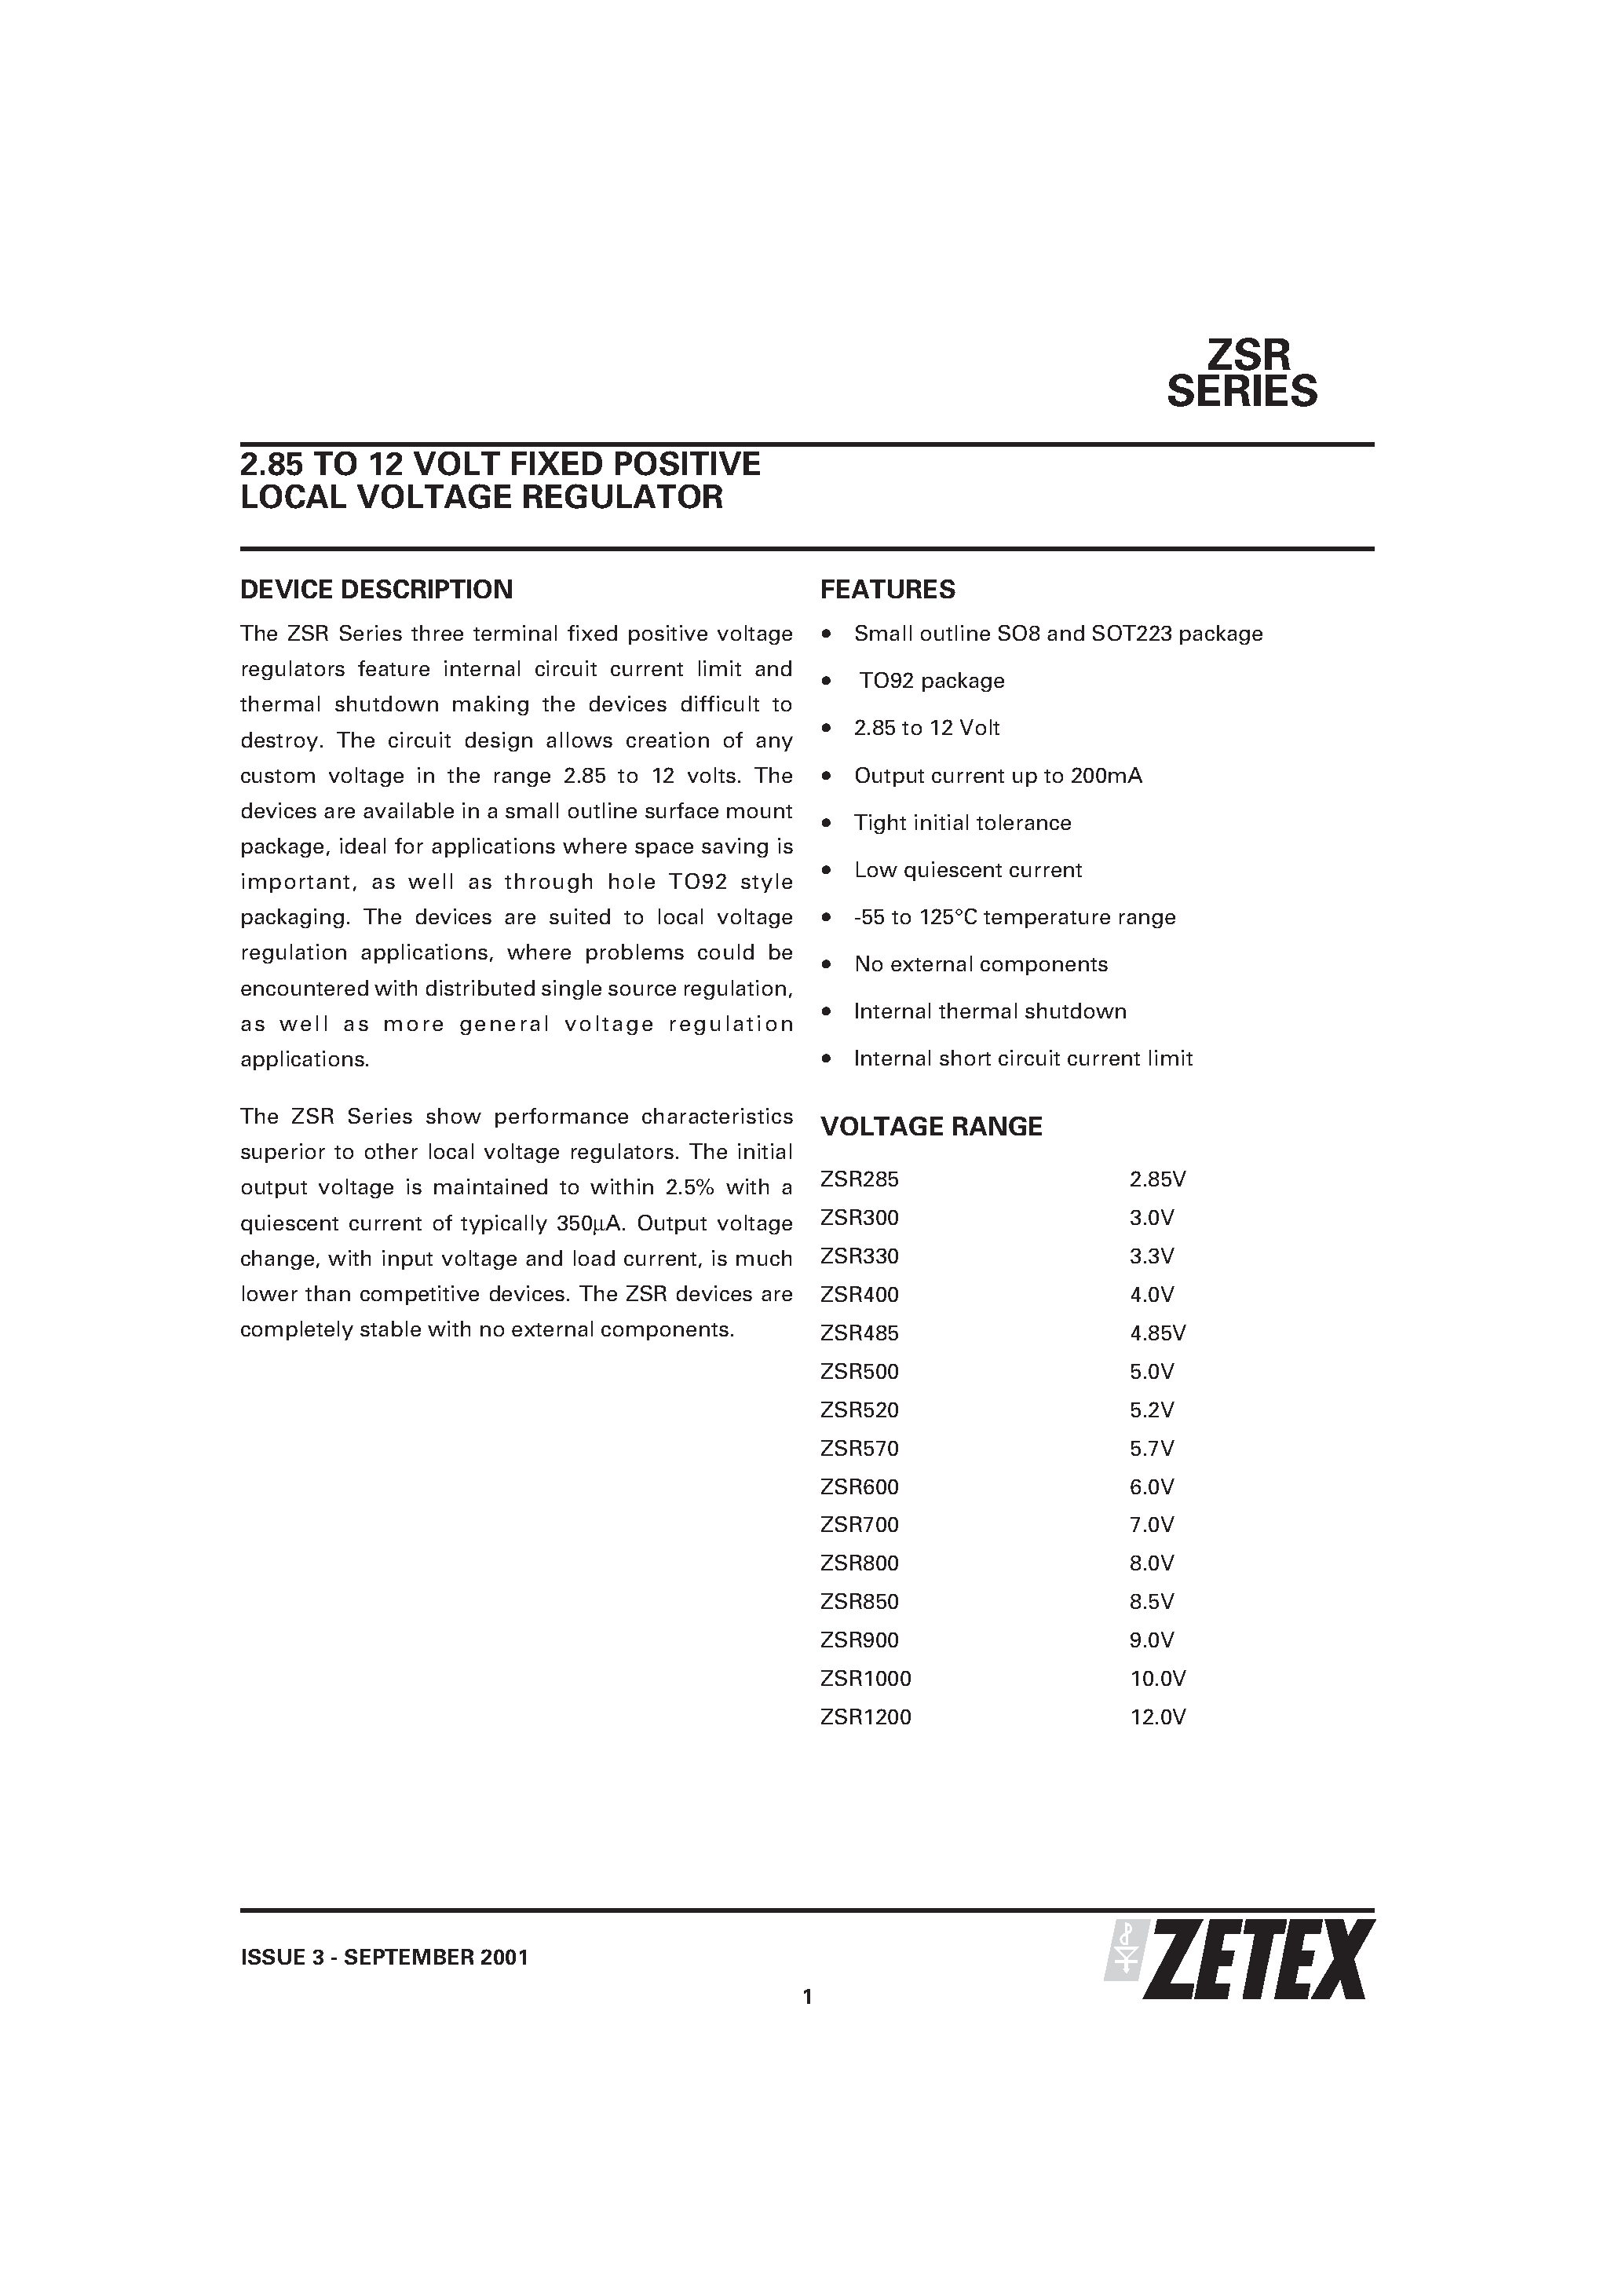 Datasheet ZSR1000N8 - 2.85 TO 12 VOLT FIXED POSITIVE LOCAL VOLTAGE REGULATOR page 1